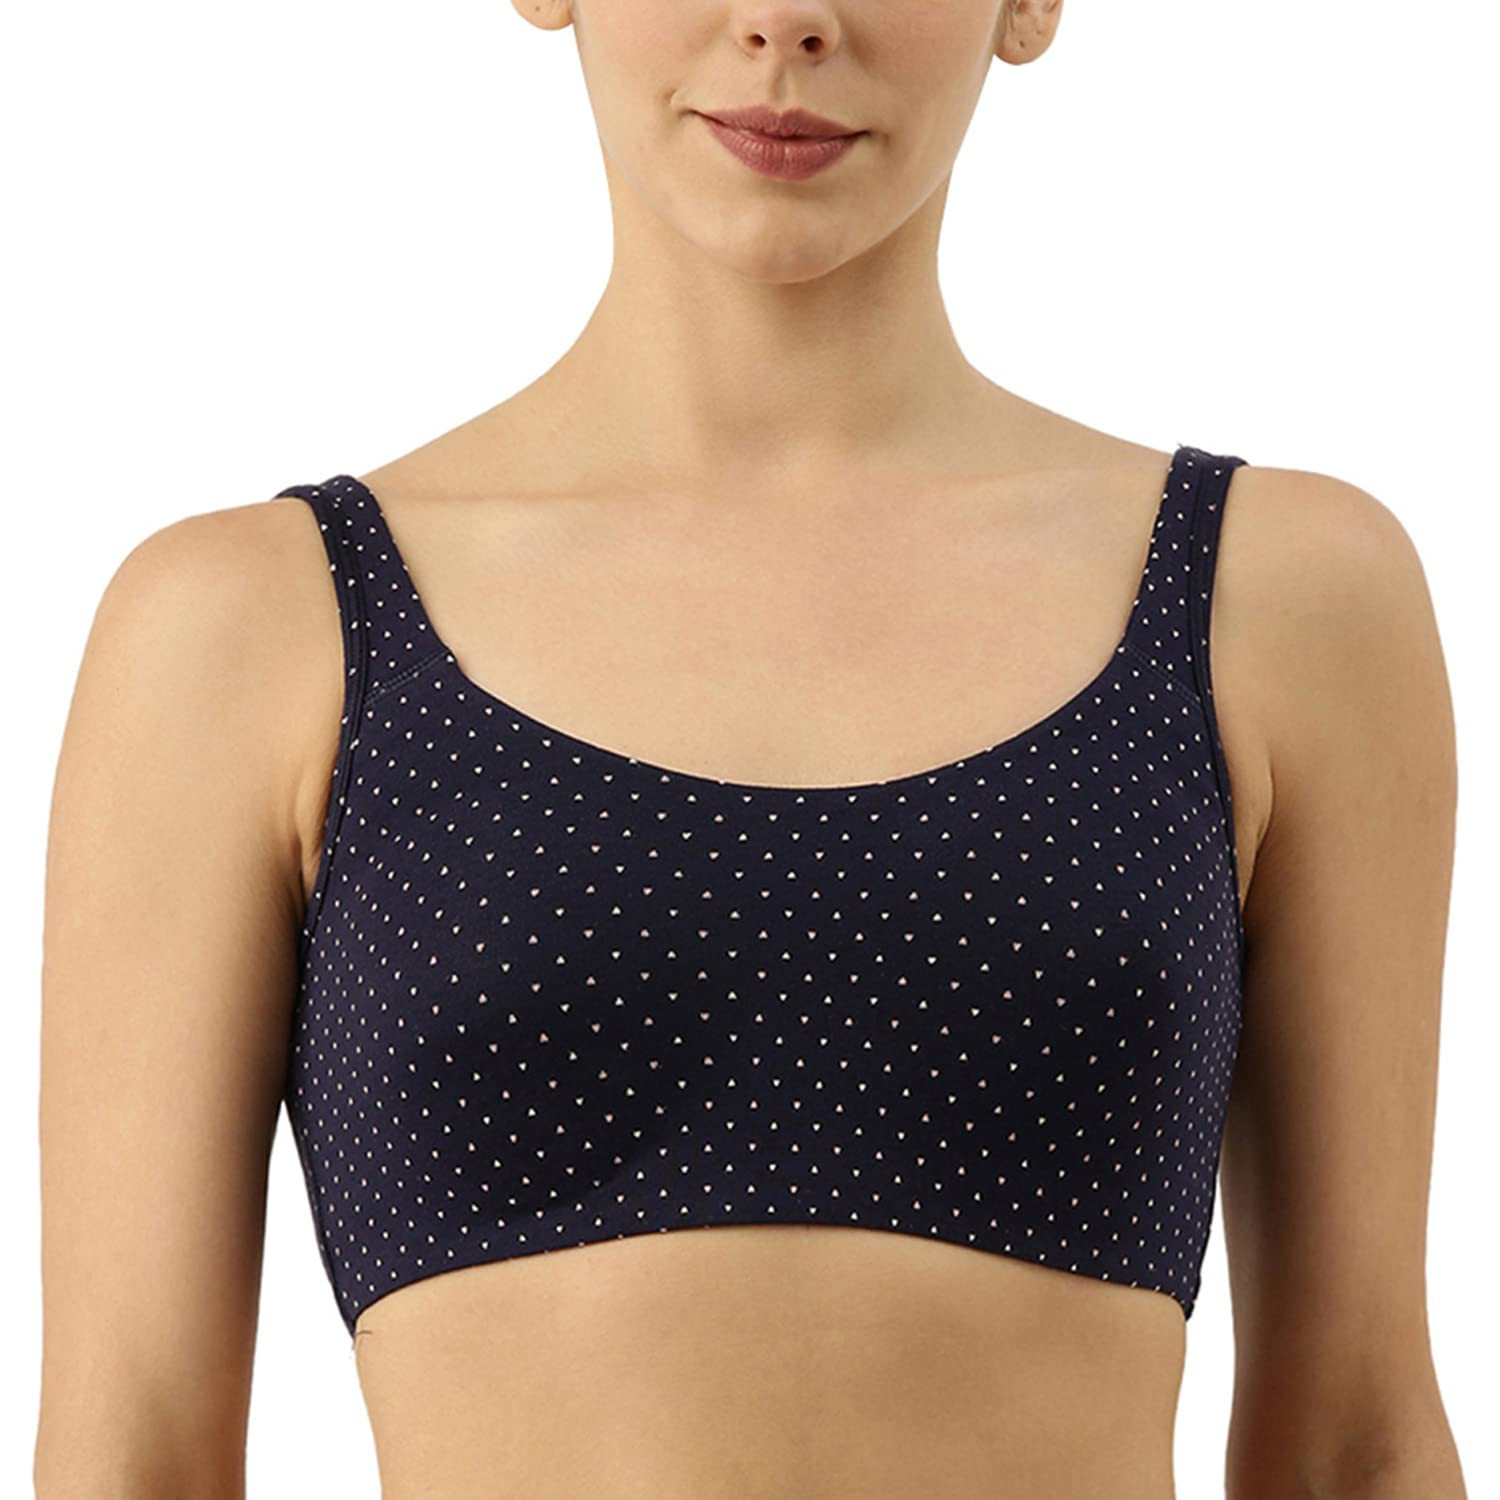 Enamor SB06 Cotton Low Impact Slip on Everyday Sports Bra for Women - Non- Padded, Non-Wired